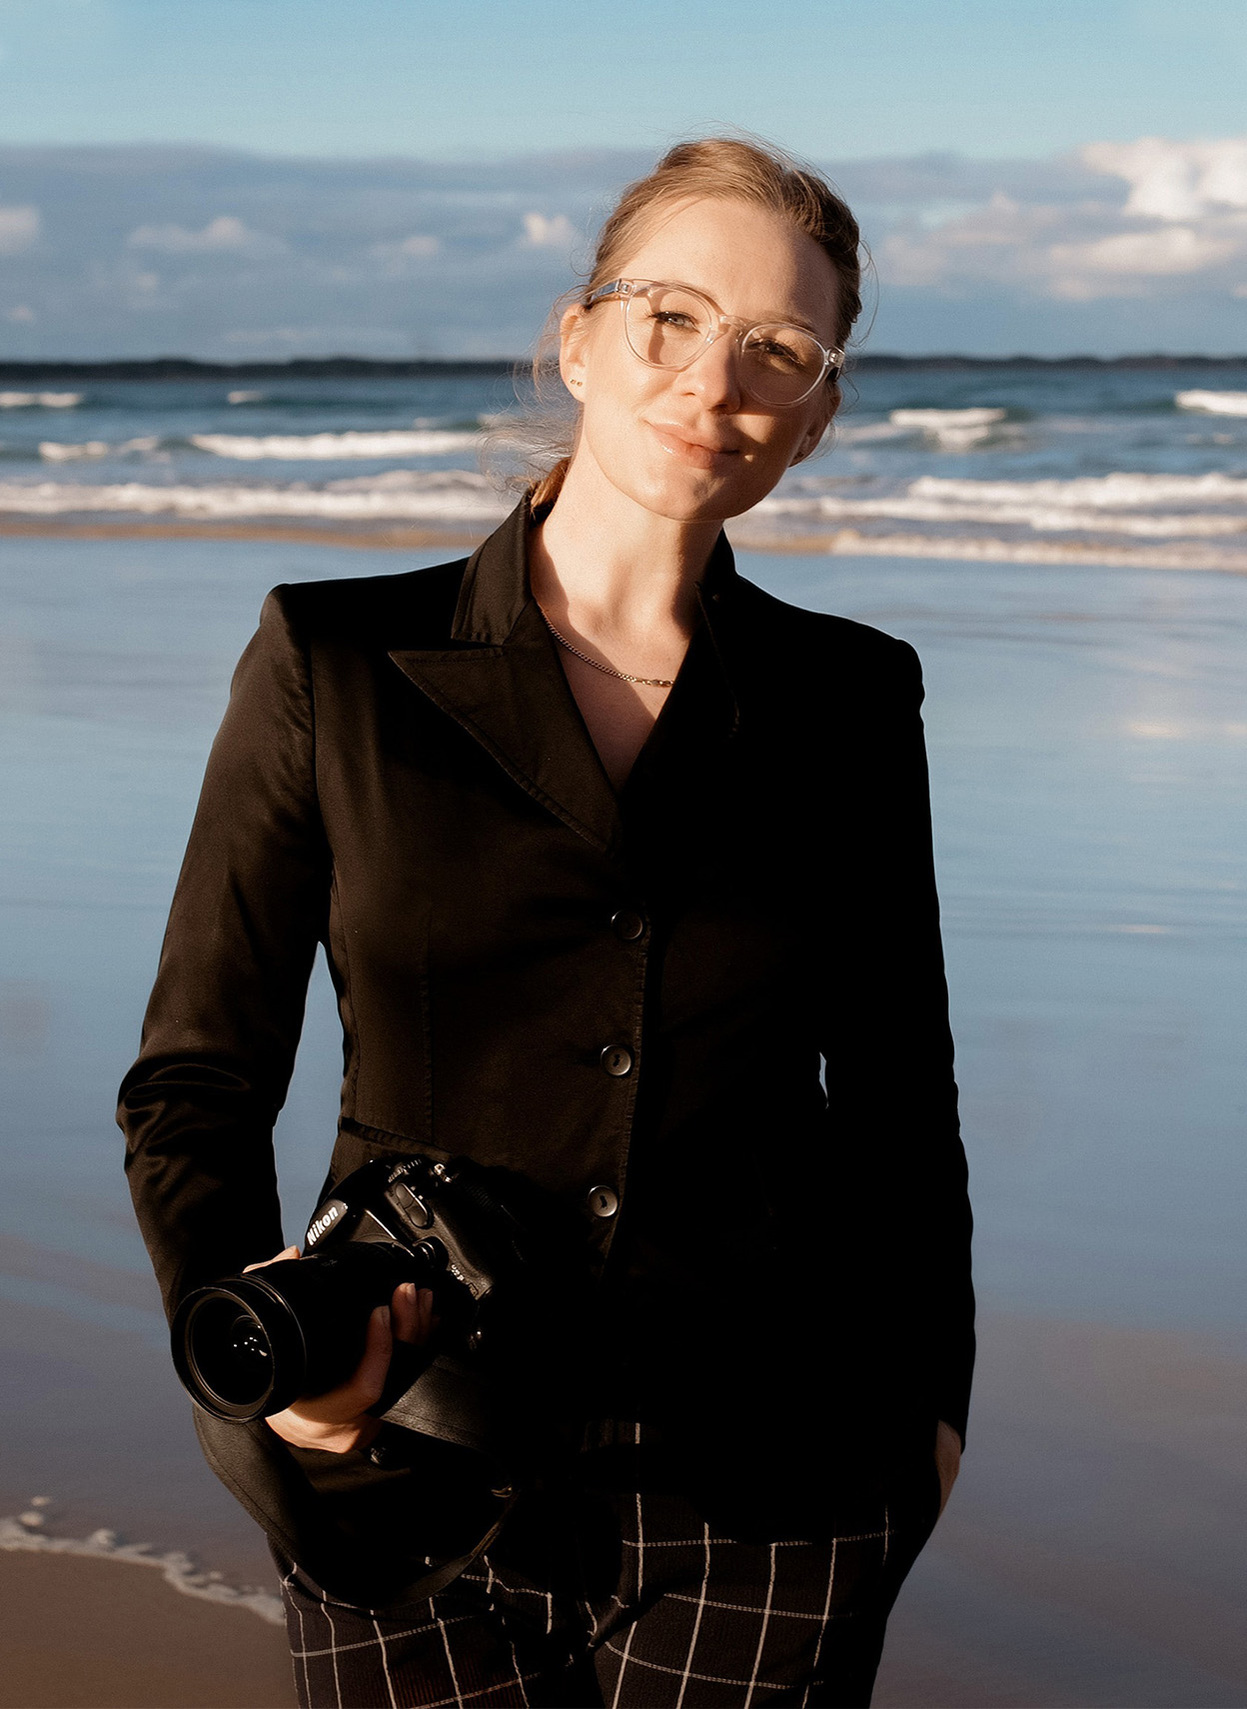 Melbourne wedding female photographer smiling while holding a camera, wearing all black. The background features a wet shoreline and the sea.